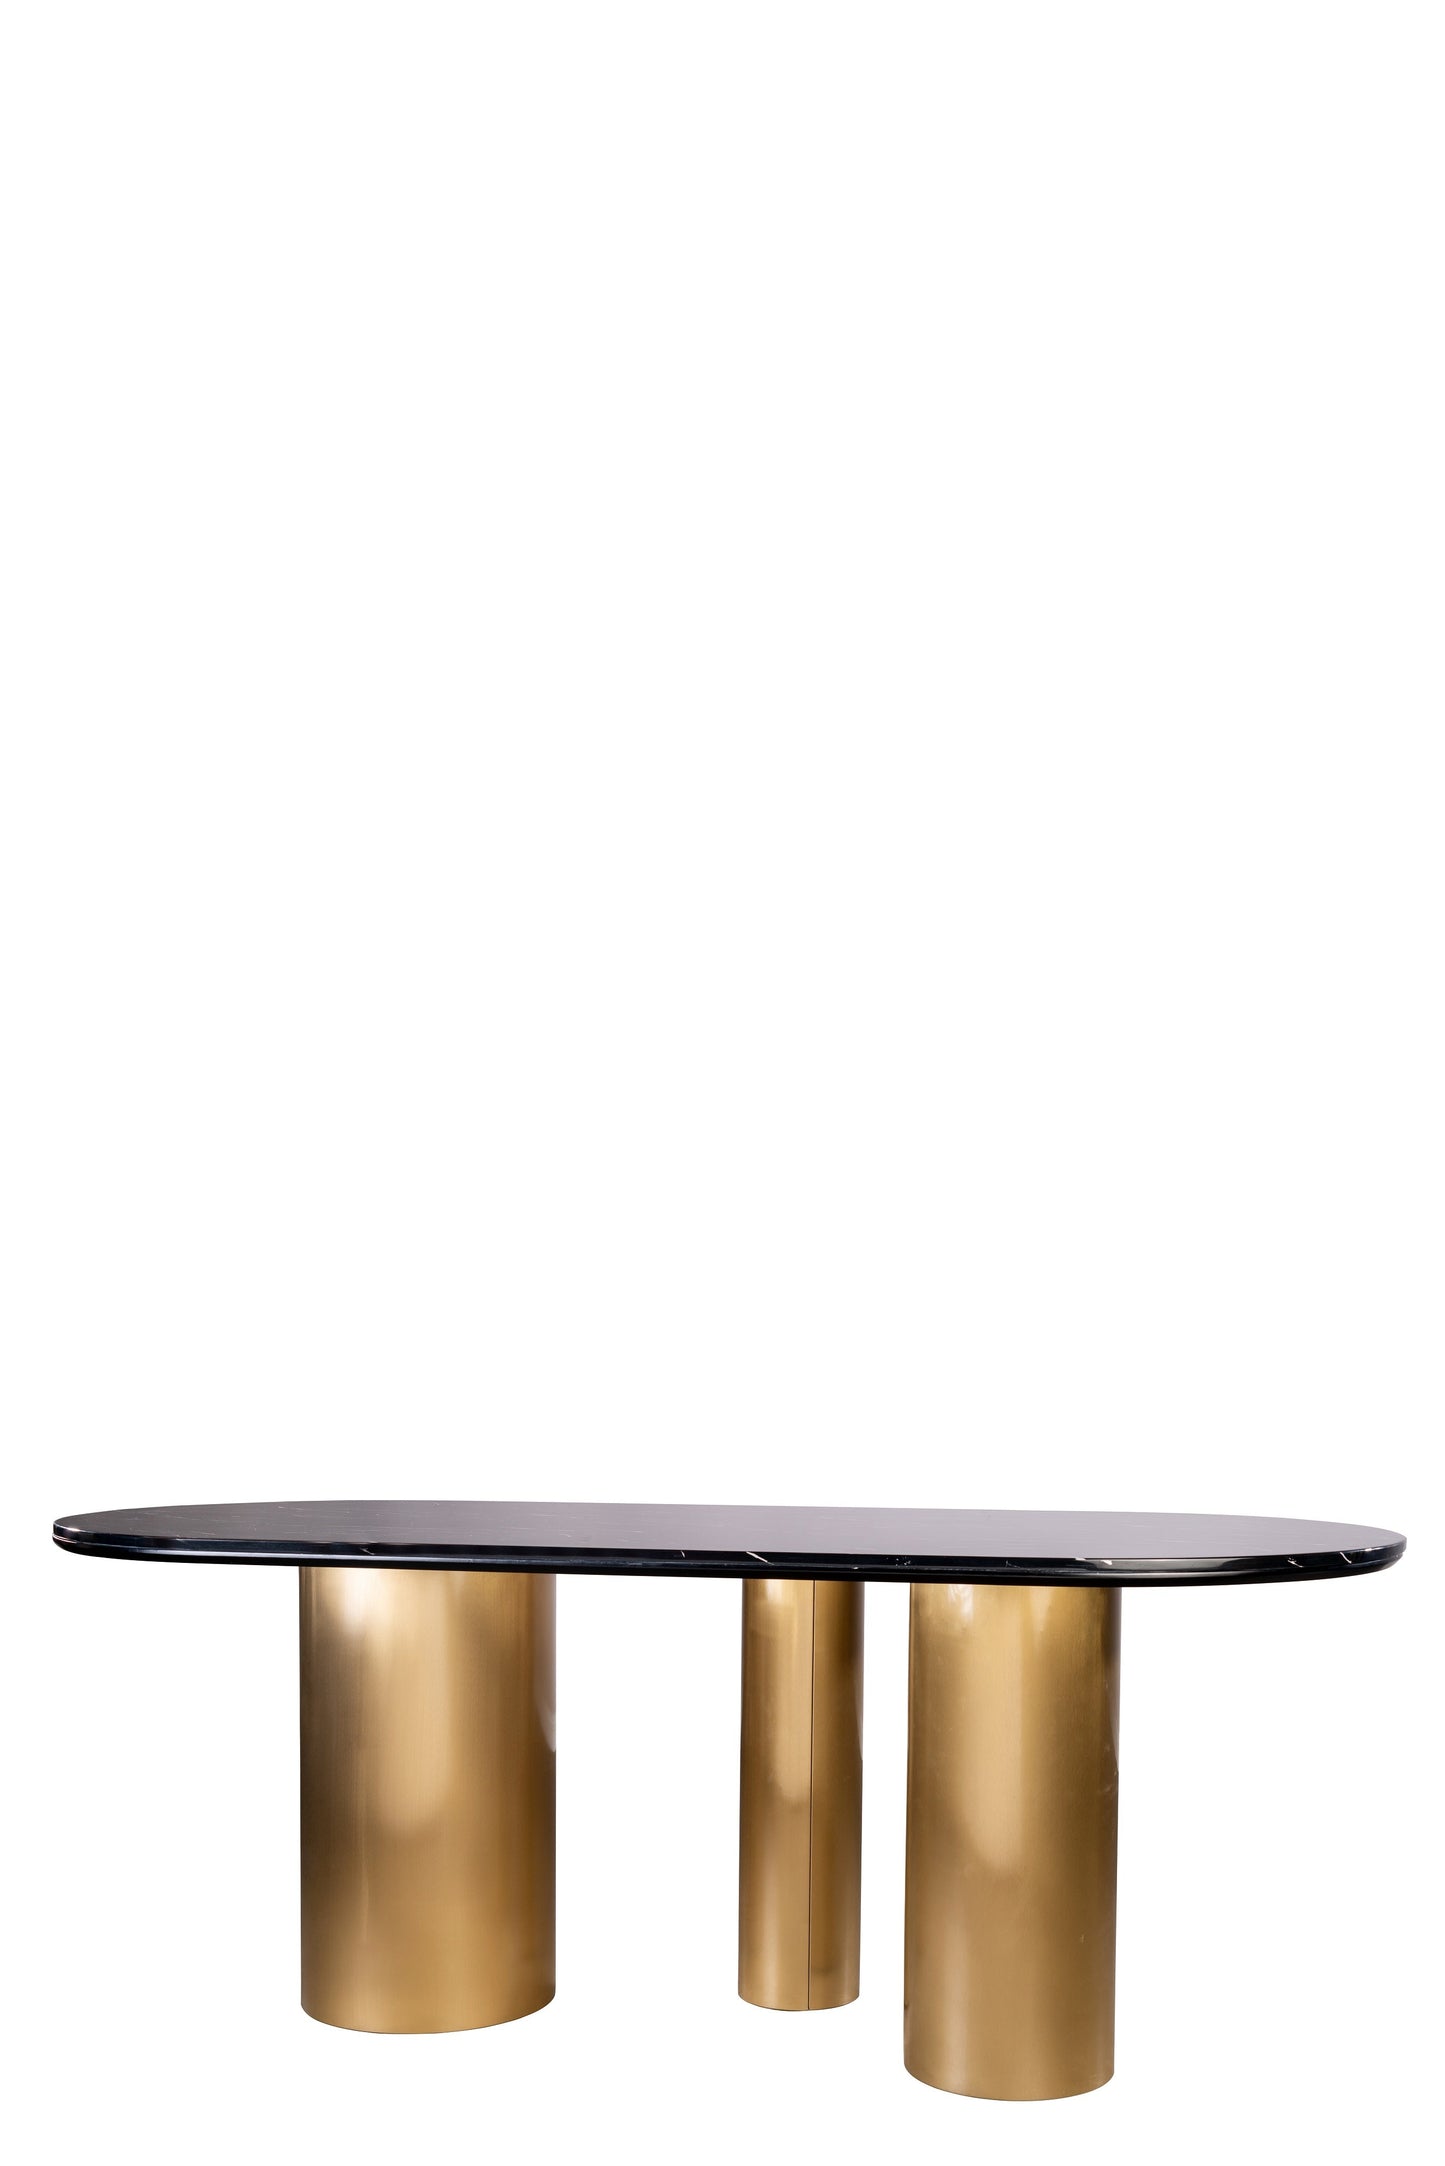 oval black and gold table